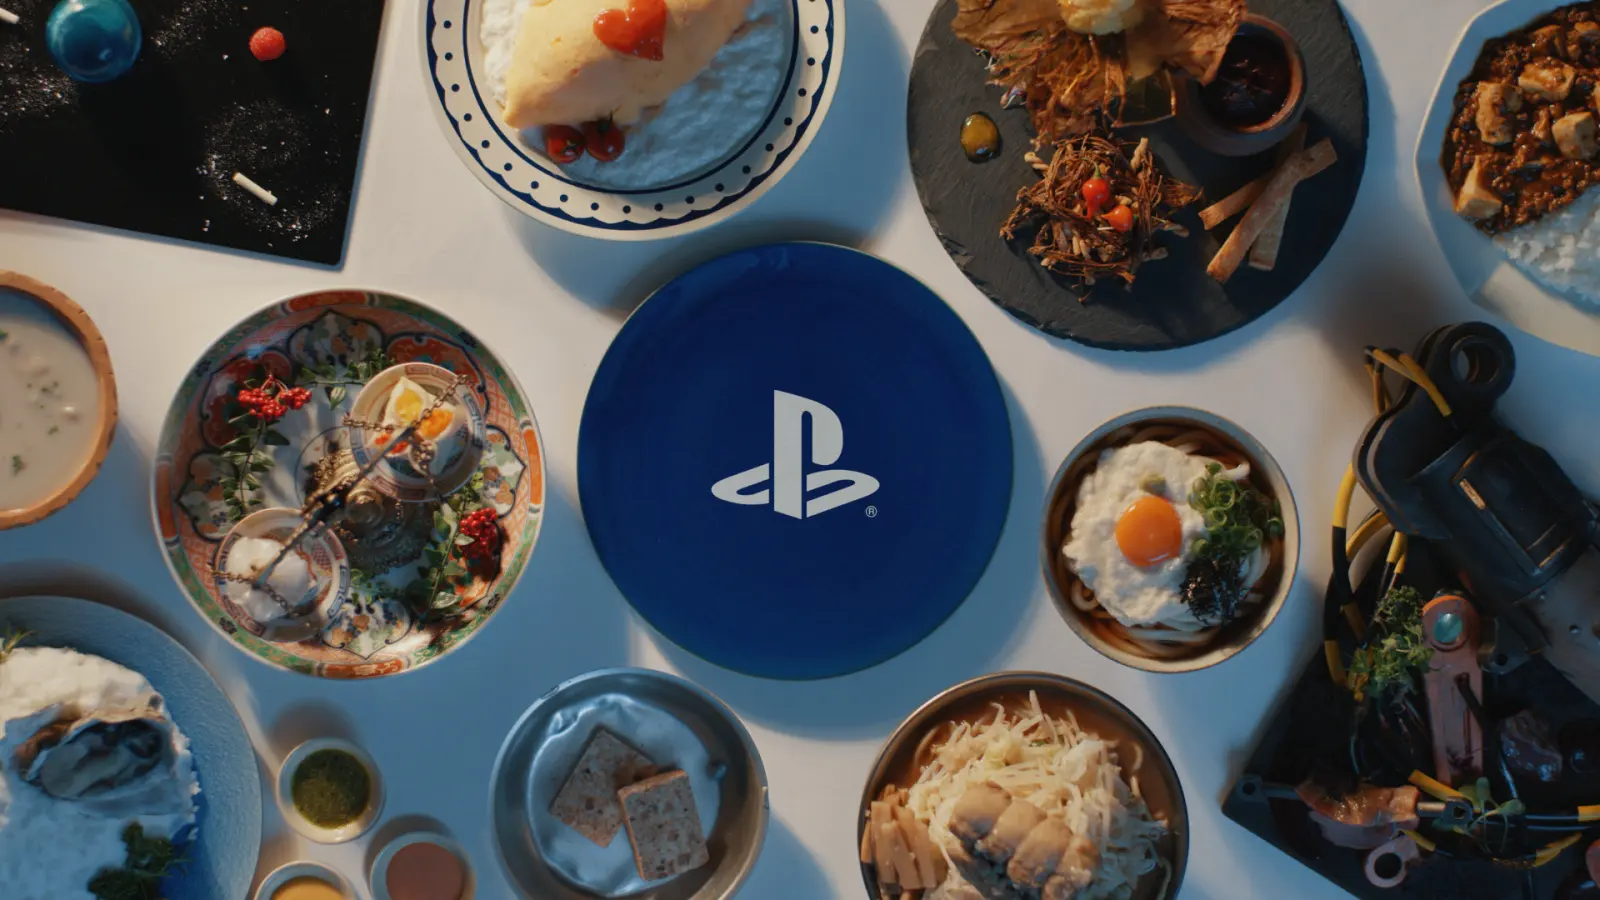 Playstation Japan公开新宣传片“The Unlimited Full Course”